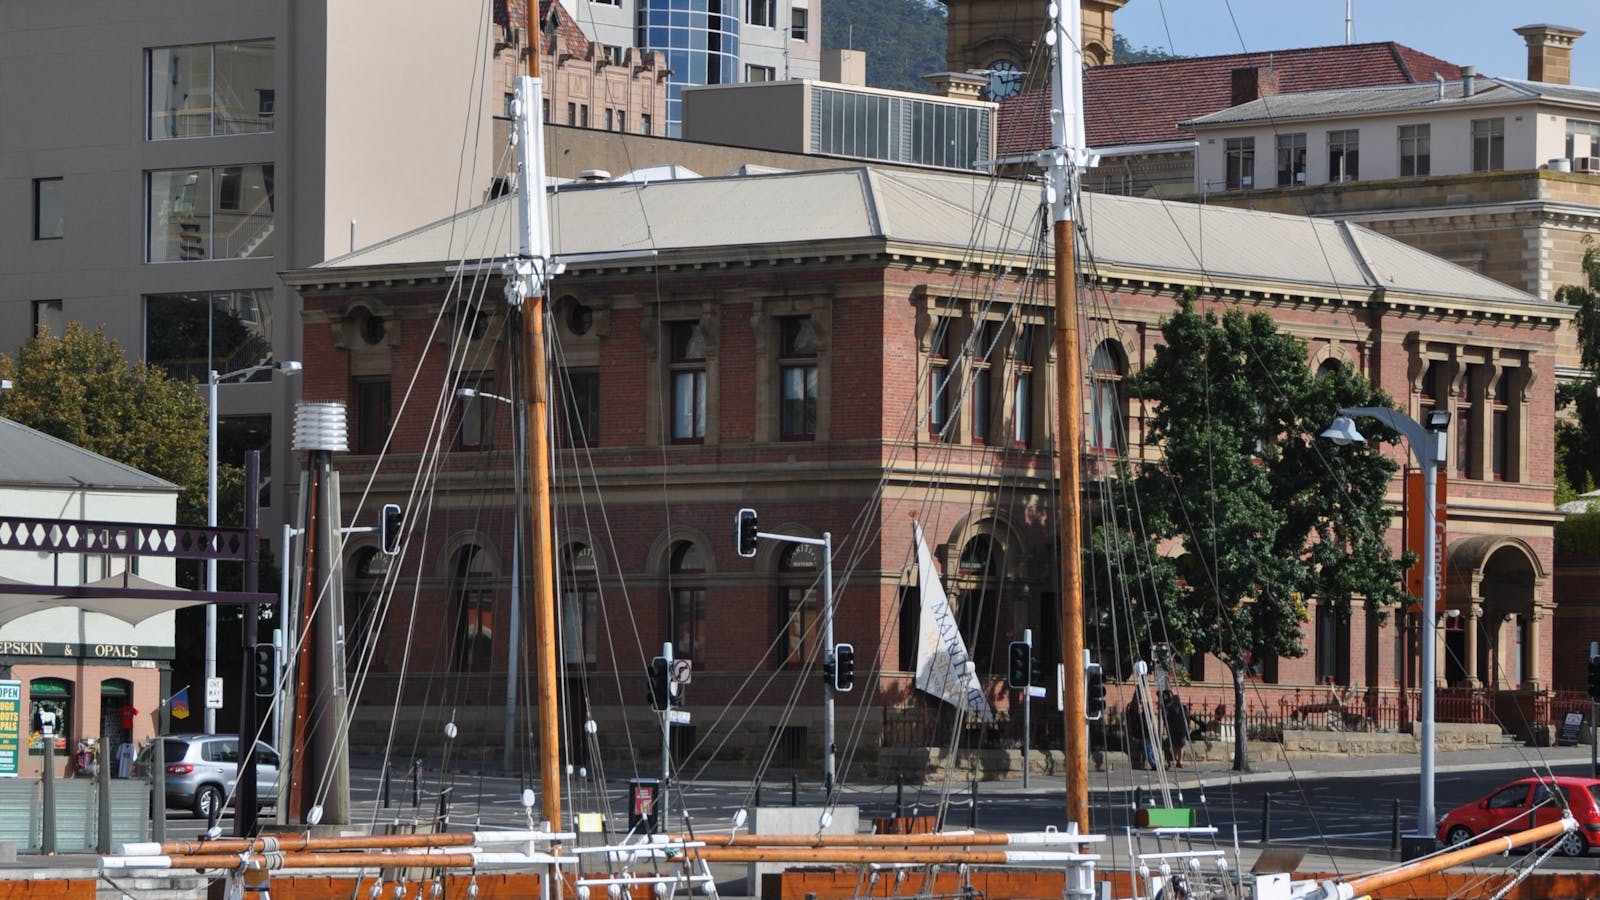 Maritime Museum of Tasmania with May Queen in foreground